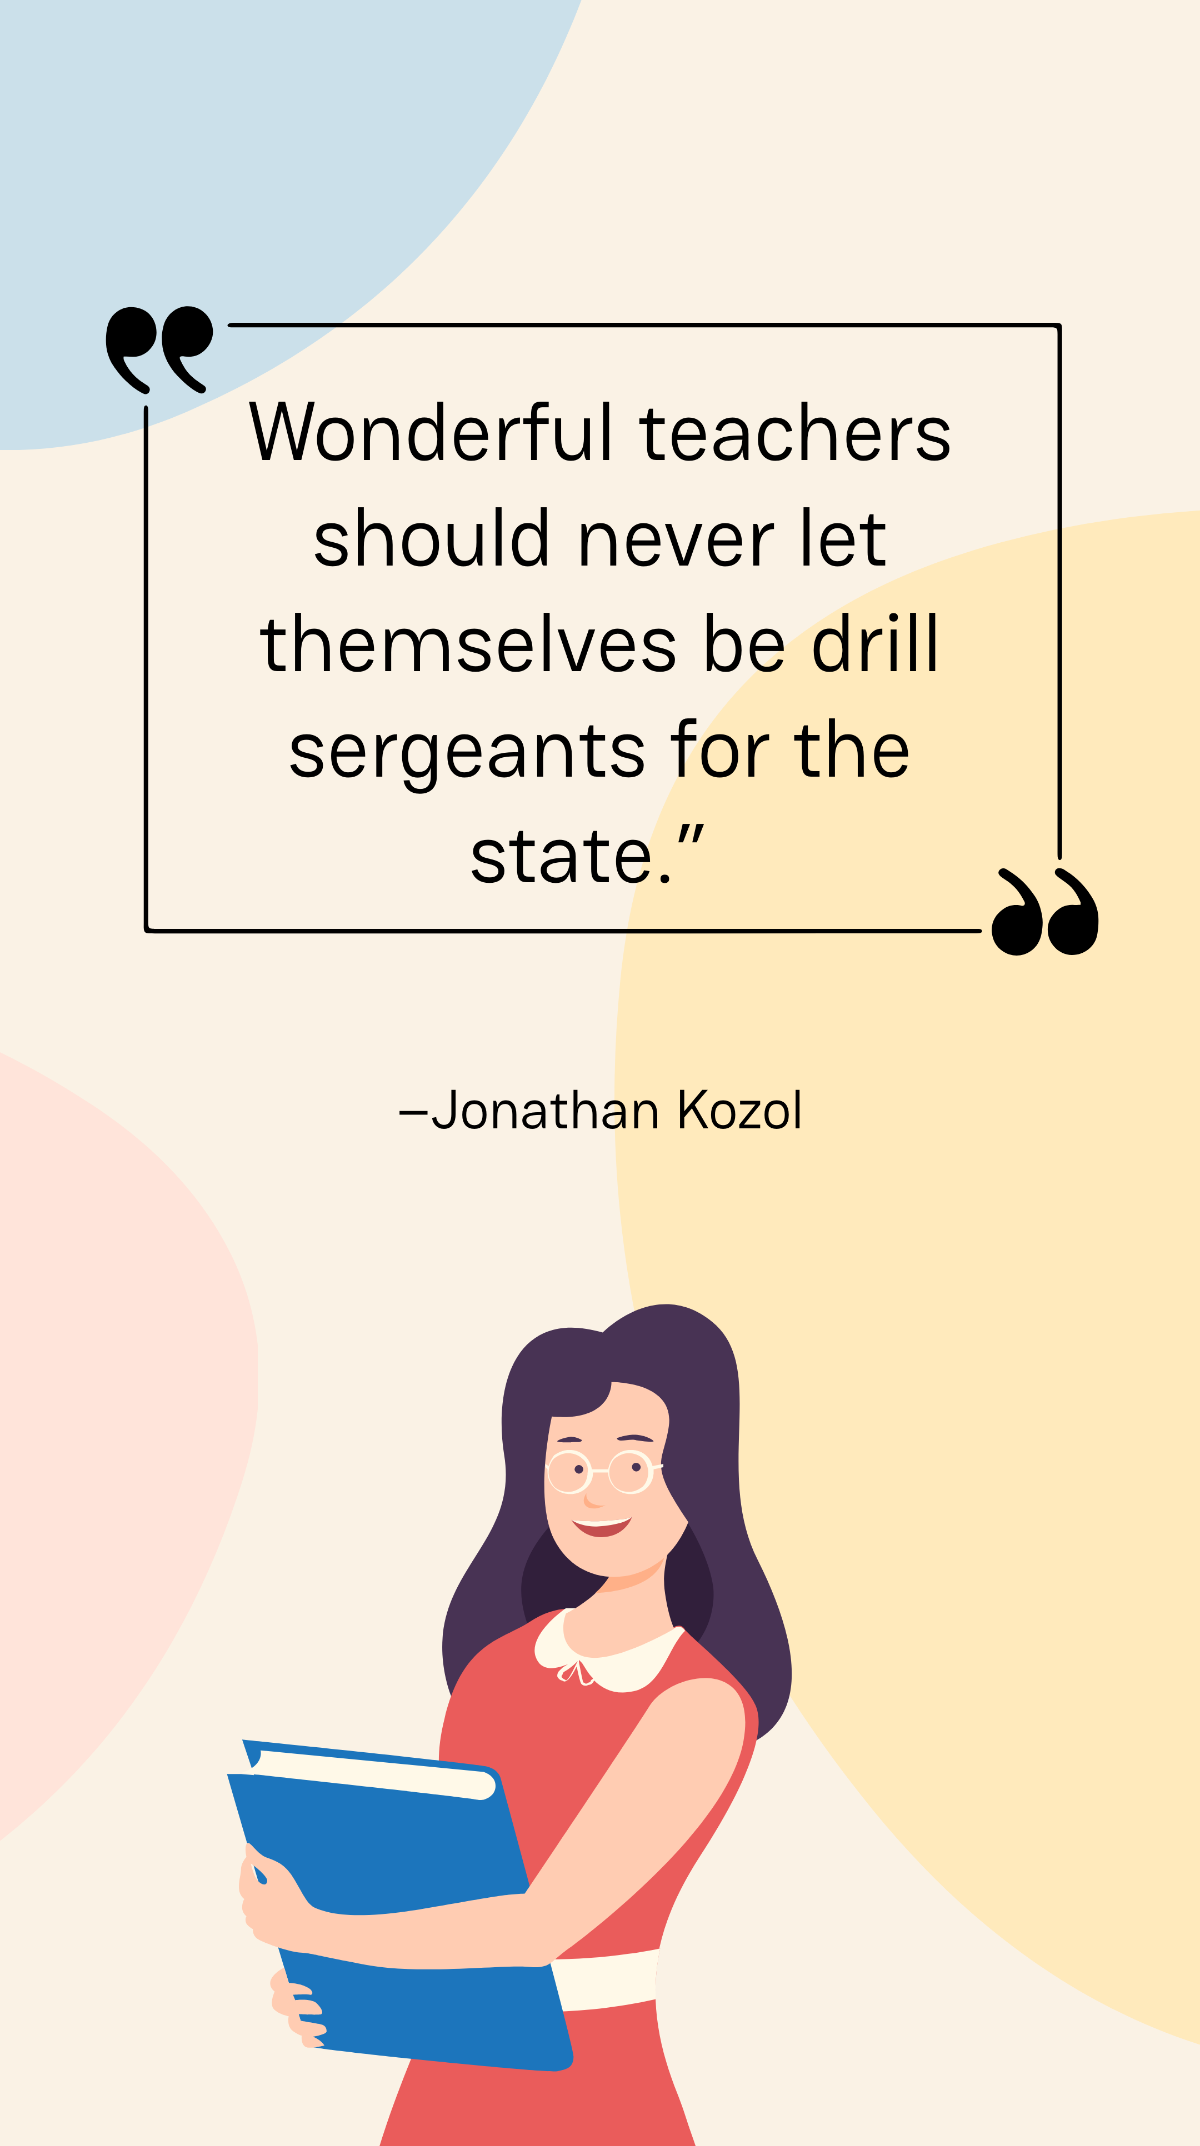 Free Jonathan Kozol - Wonderful teachers should never let themselves be drill sergeants for the state. Template